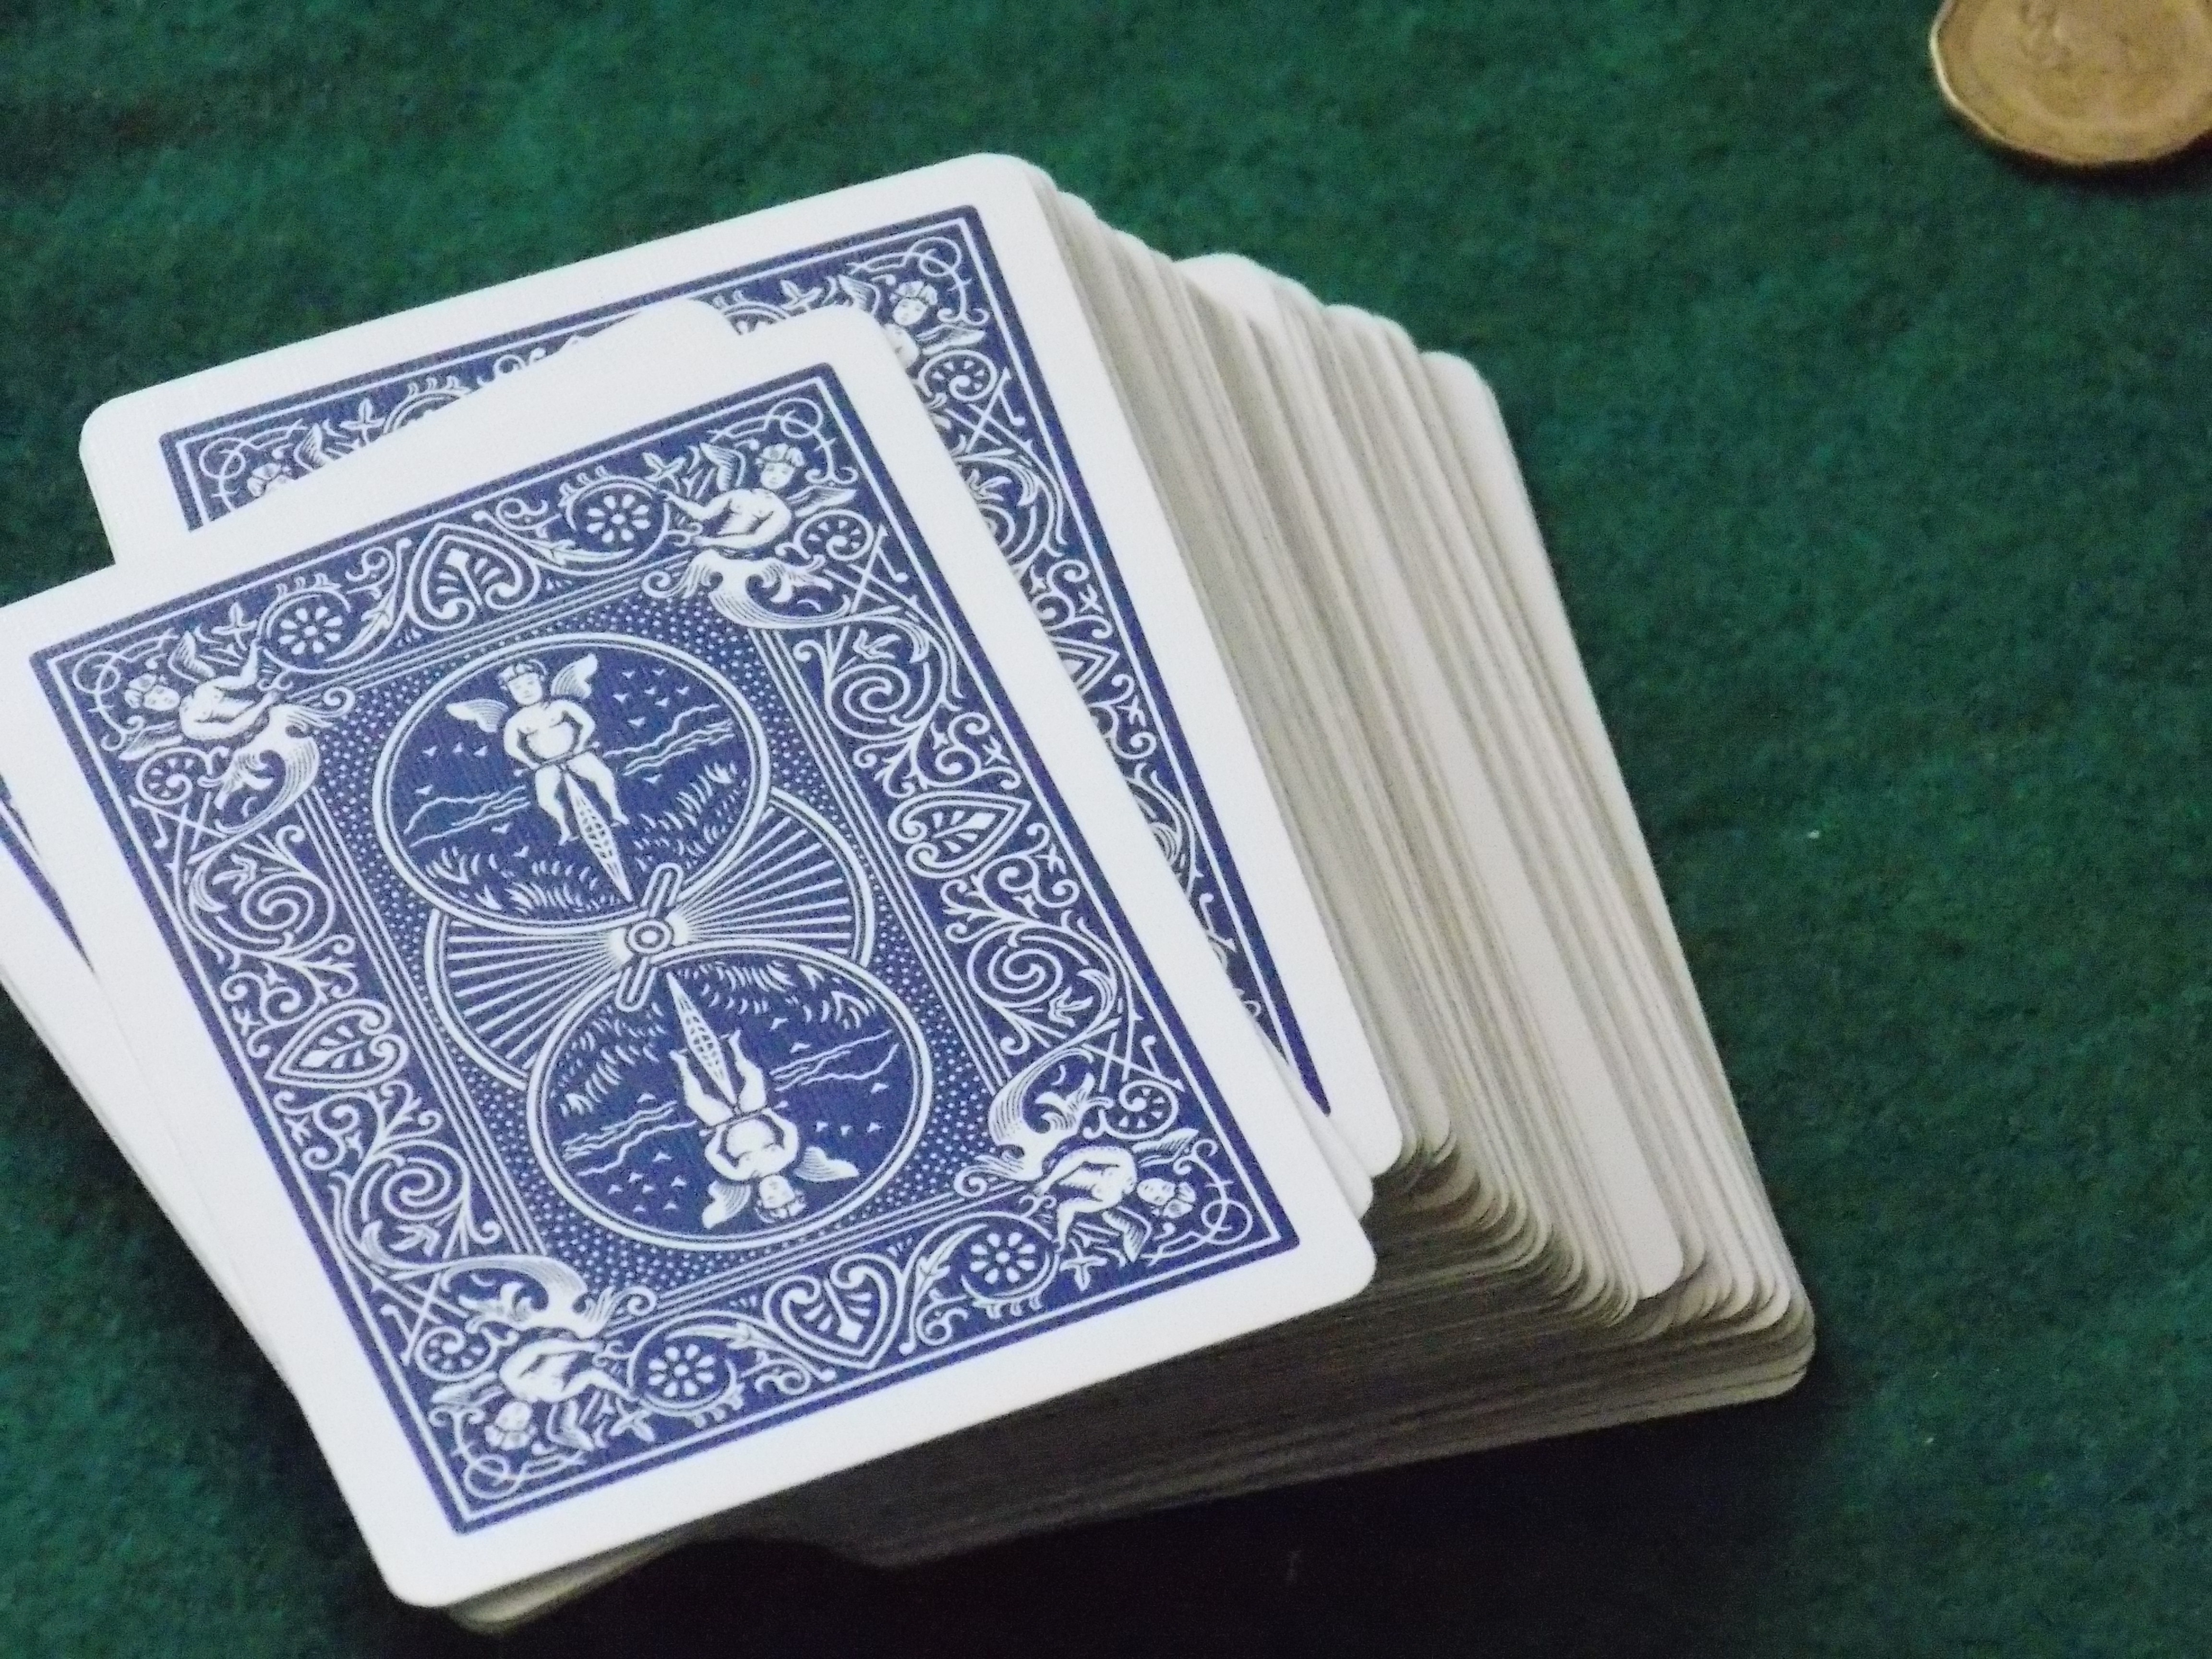 playing card set on green casino table